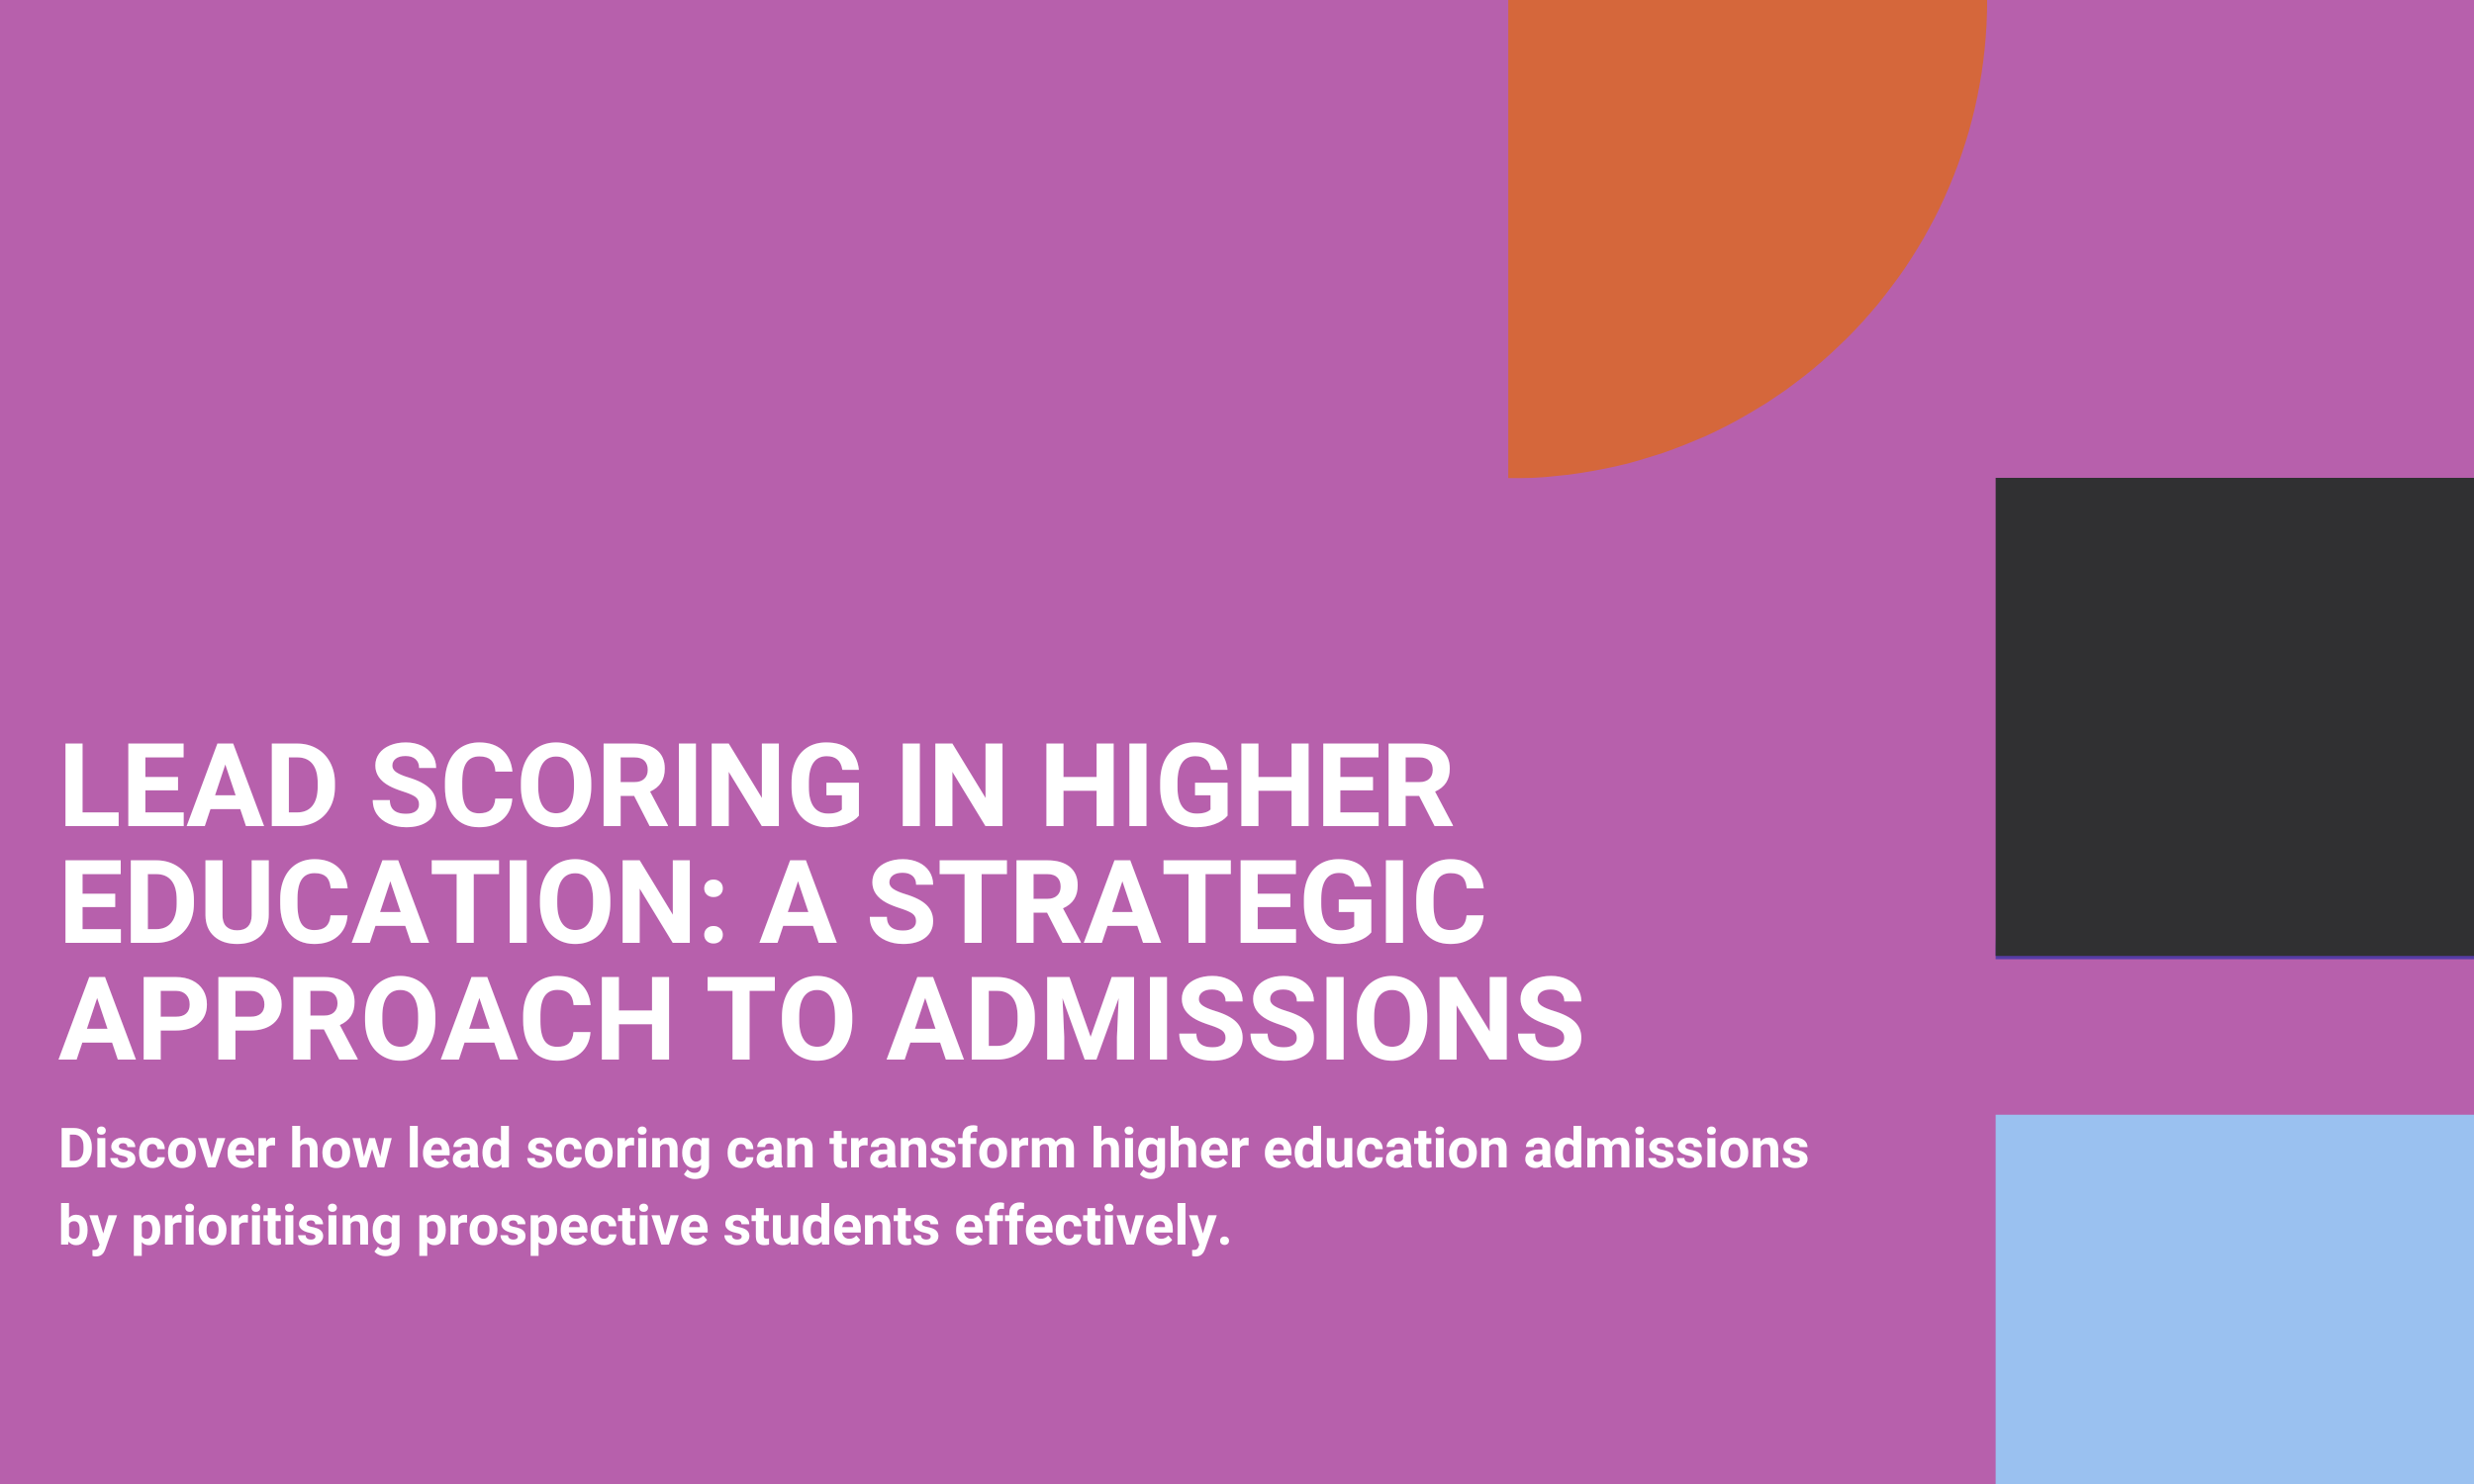 Lead Scoring in Higher Education: A Strategic Approach to Admissions